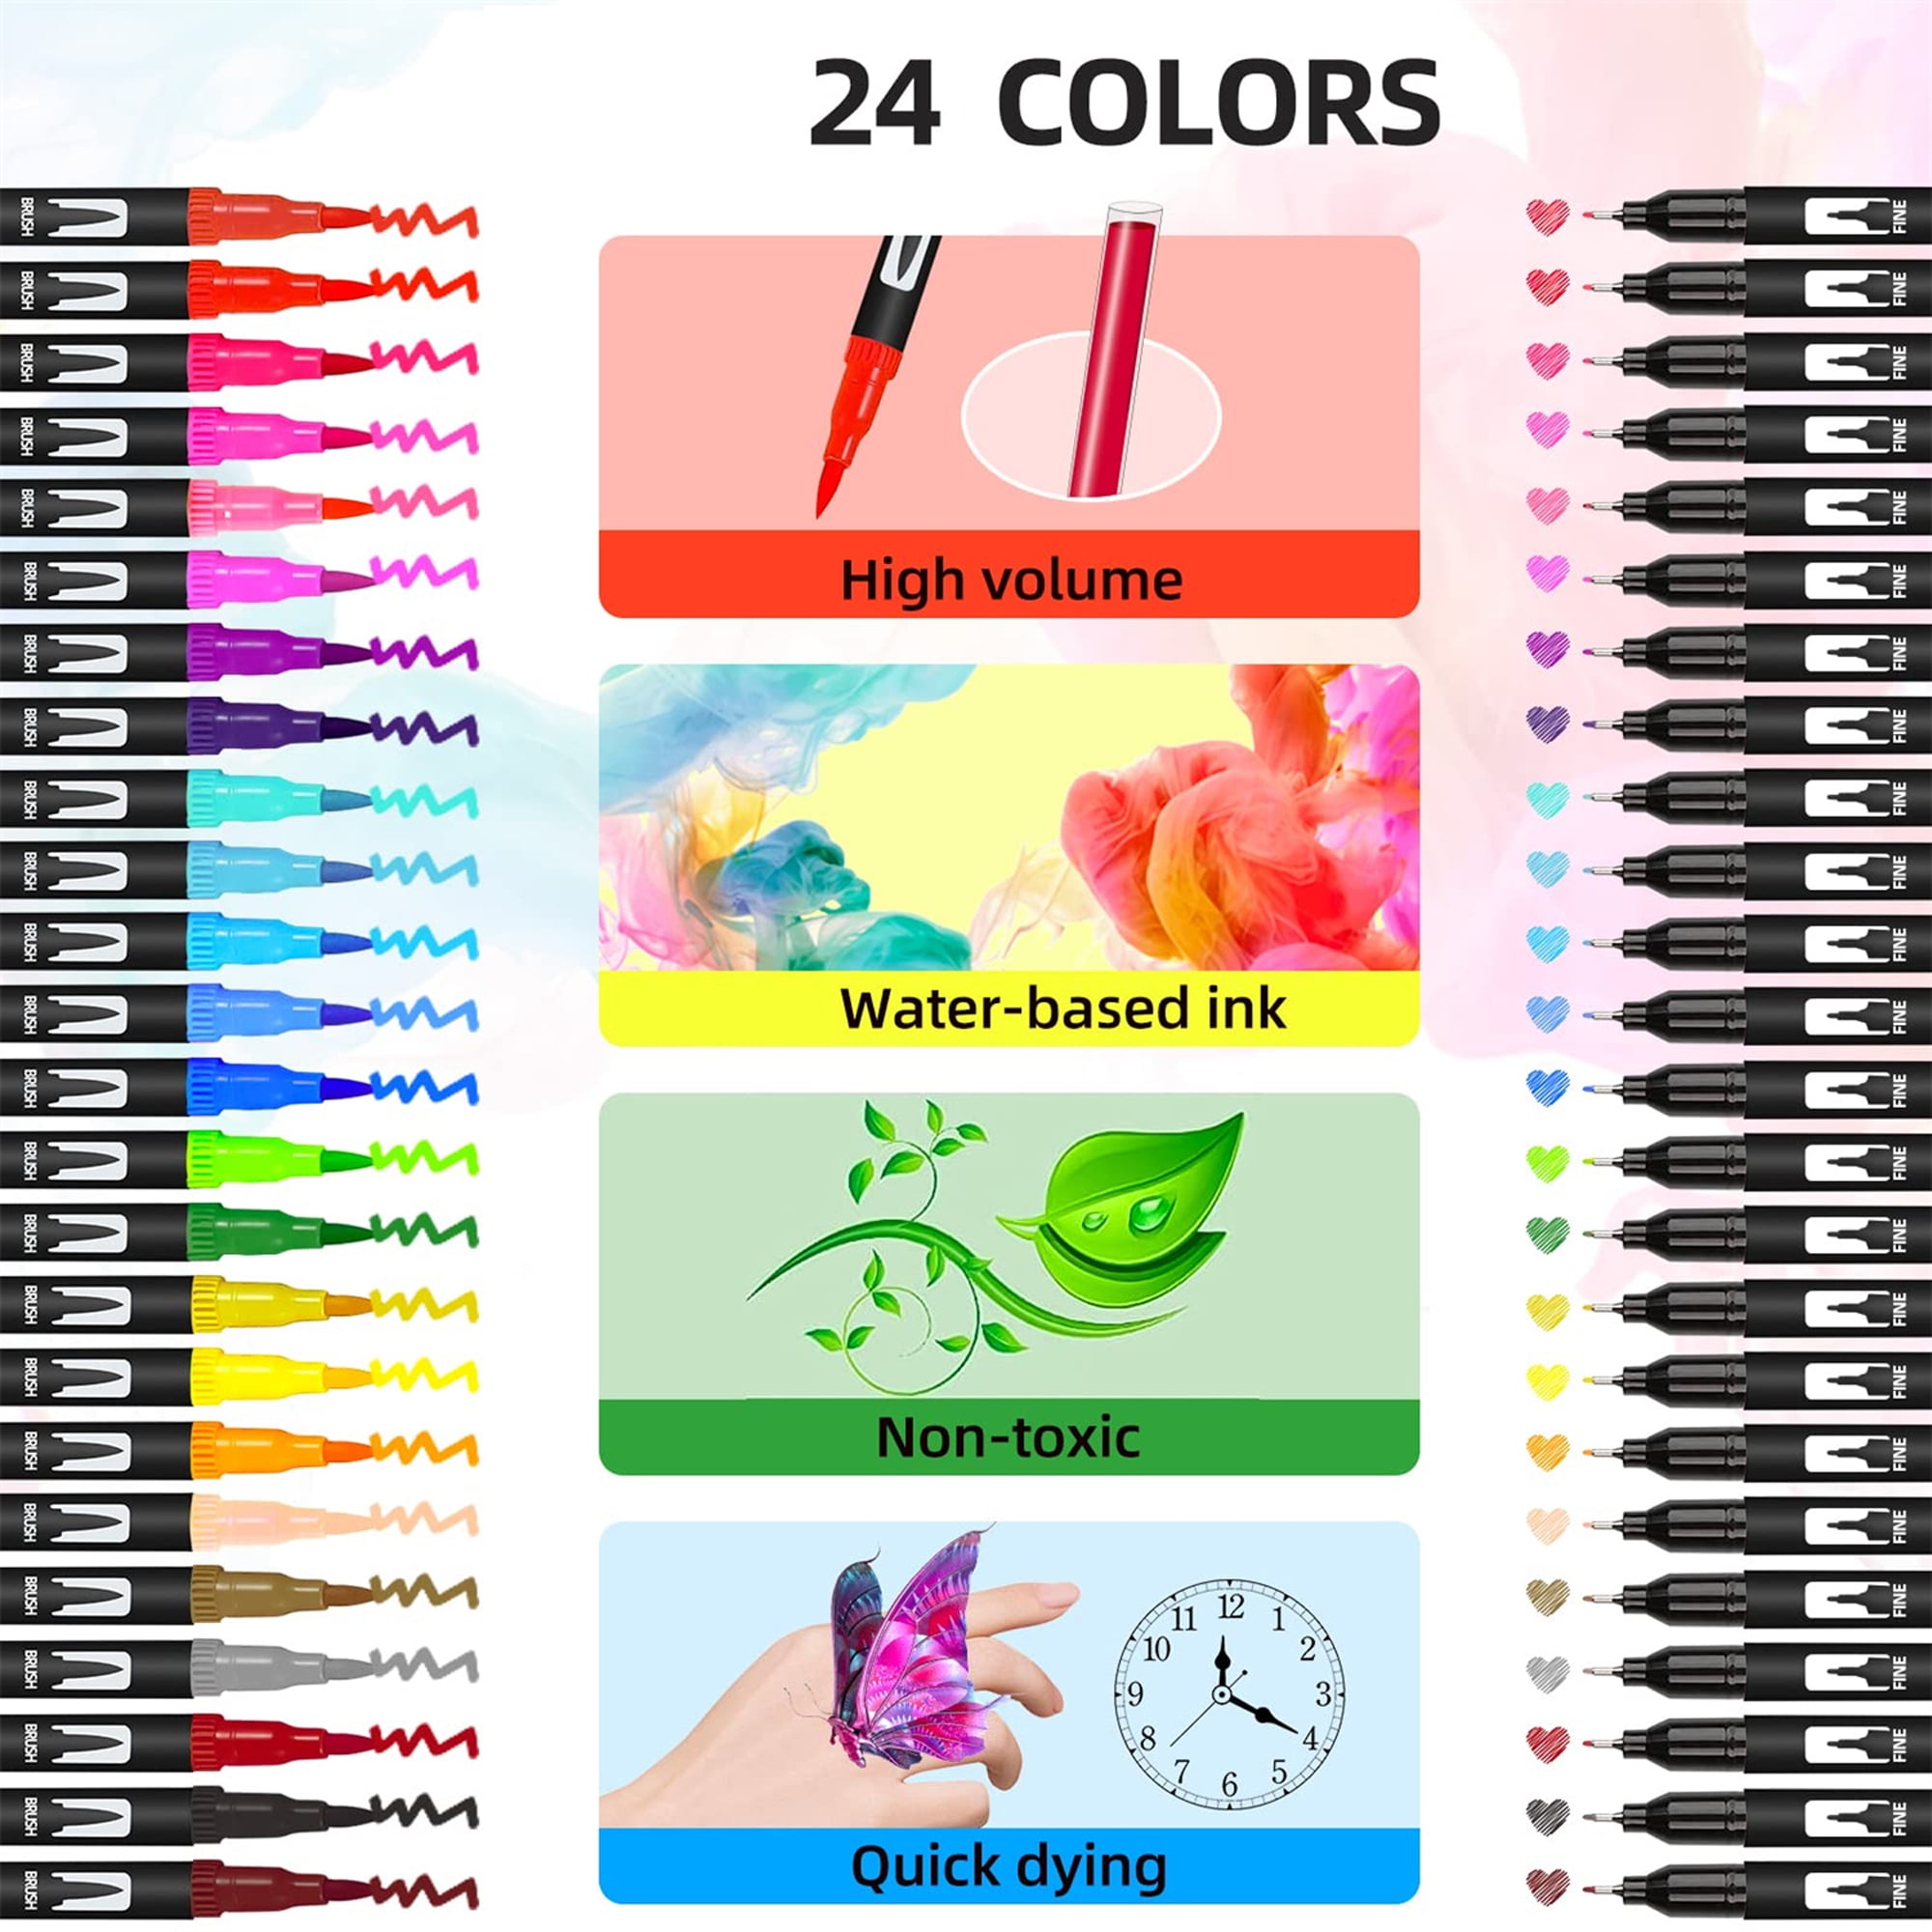  SAYEEC Dual Brush Marker Pens 12 Colored Art Coloring Markers  with Fine Point and Brush Tip Dual Tip Calligraphy Drawing Pens for Artist  Adult Coloring Books Journaling Note Taking Lettering